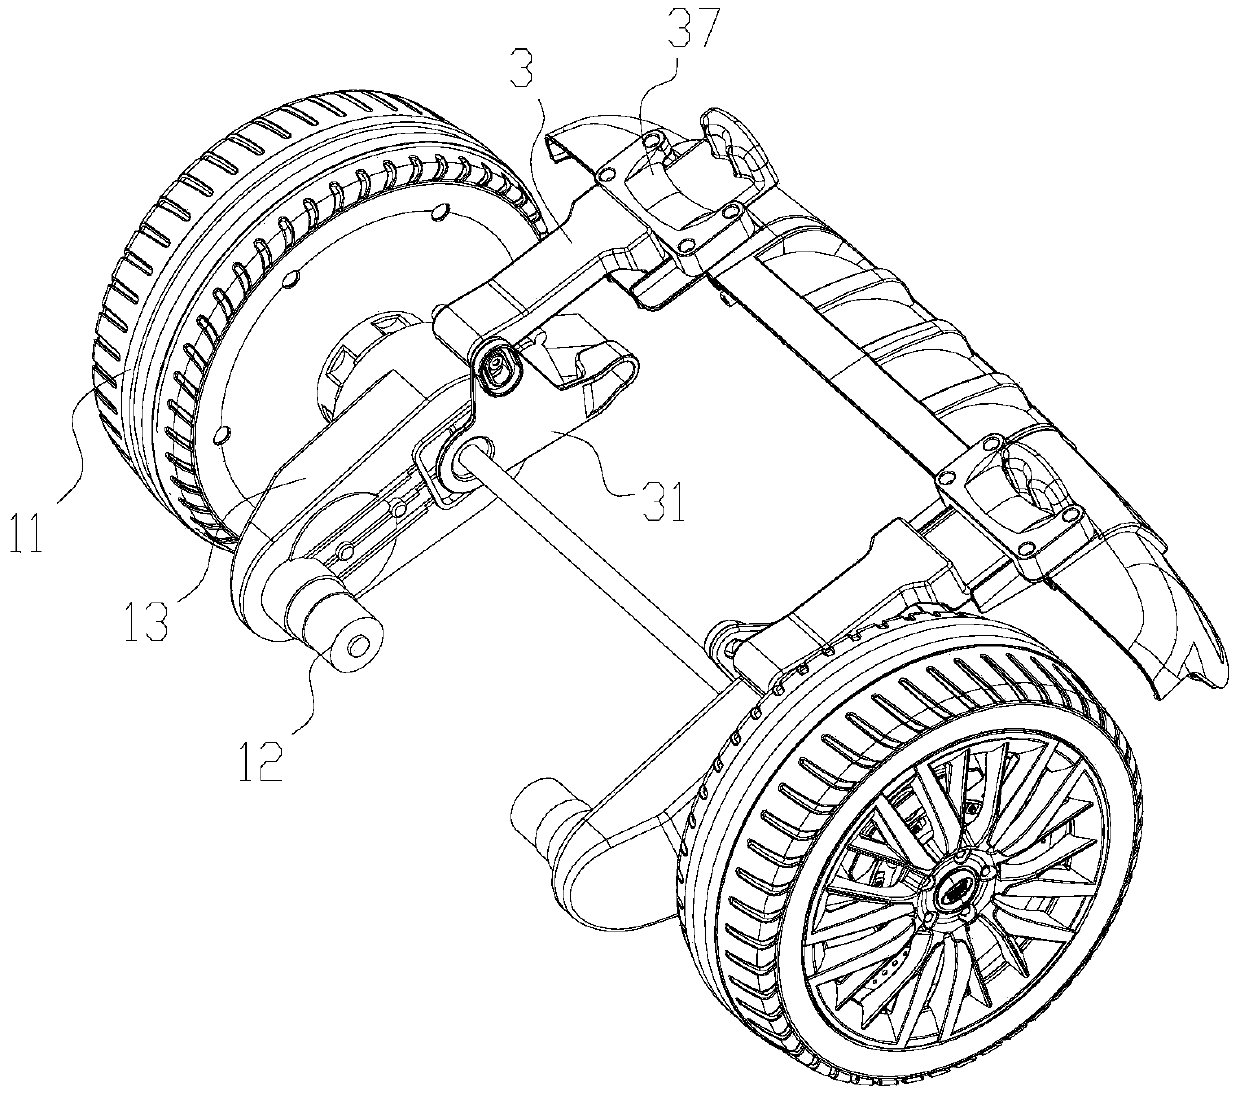 Electric baby carriage with disengaging and engaging structure